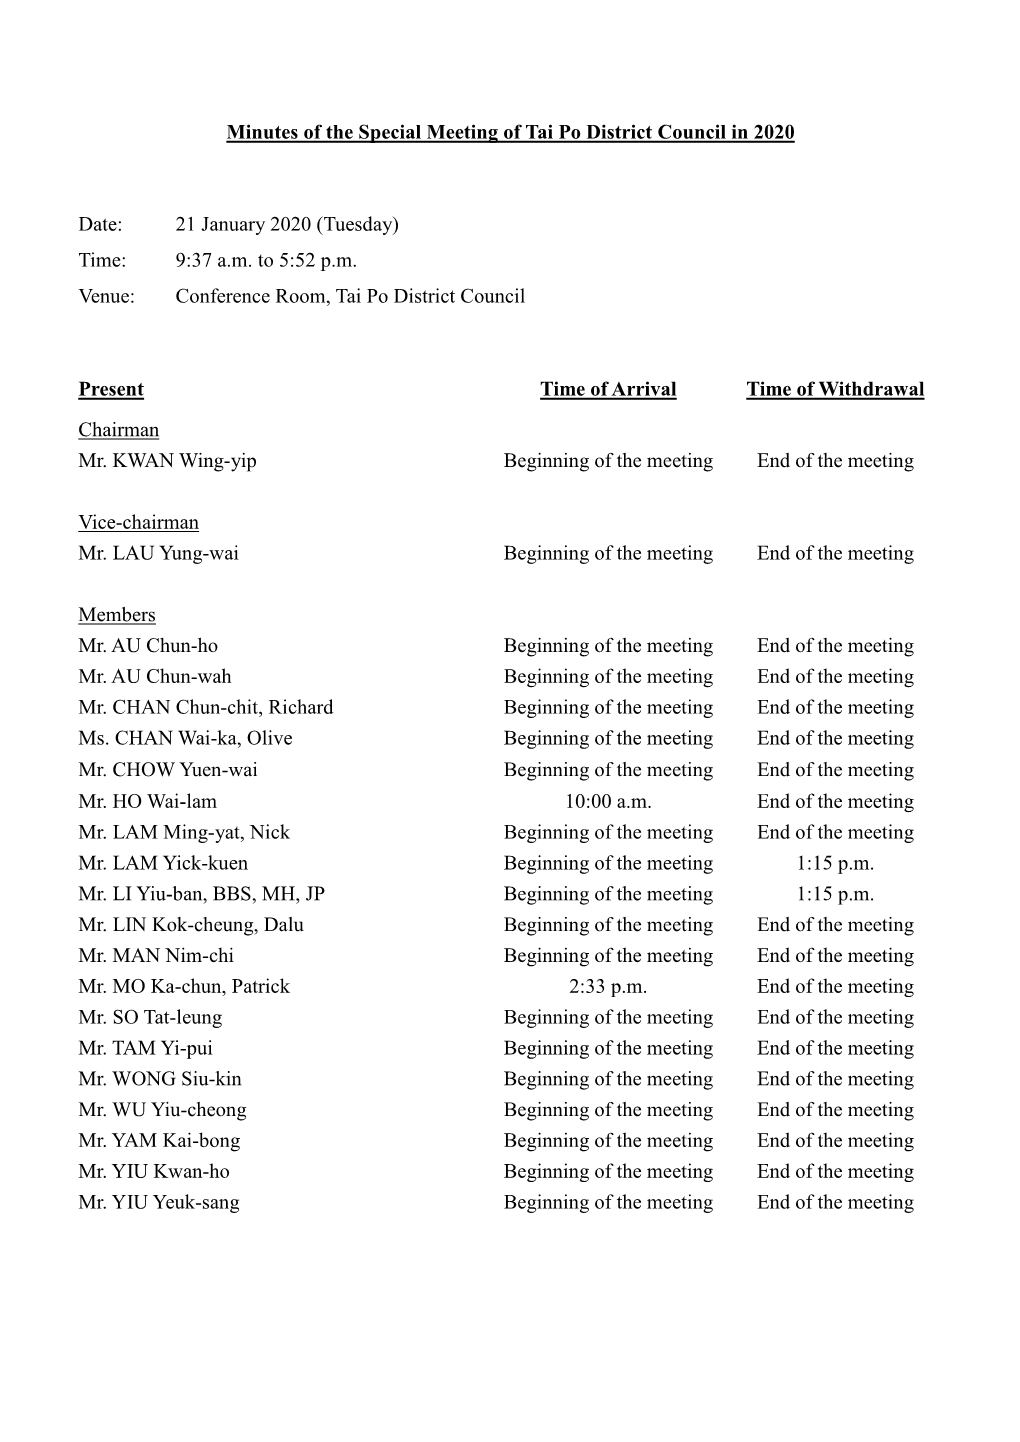 Minutes of the Special Meeting of Tai Po District Council in 2020 Date: 21